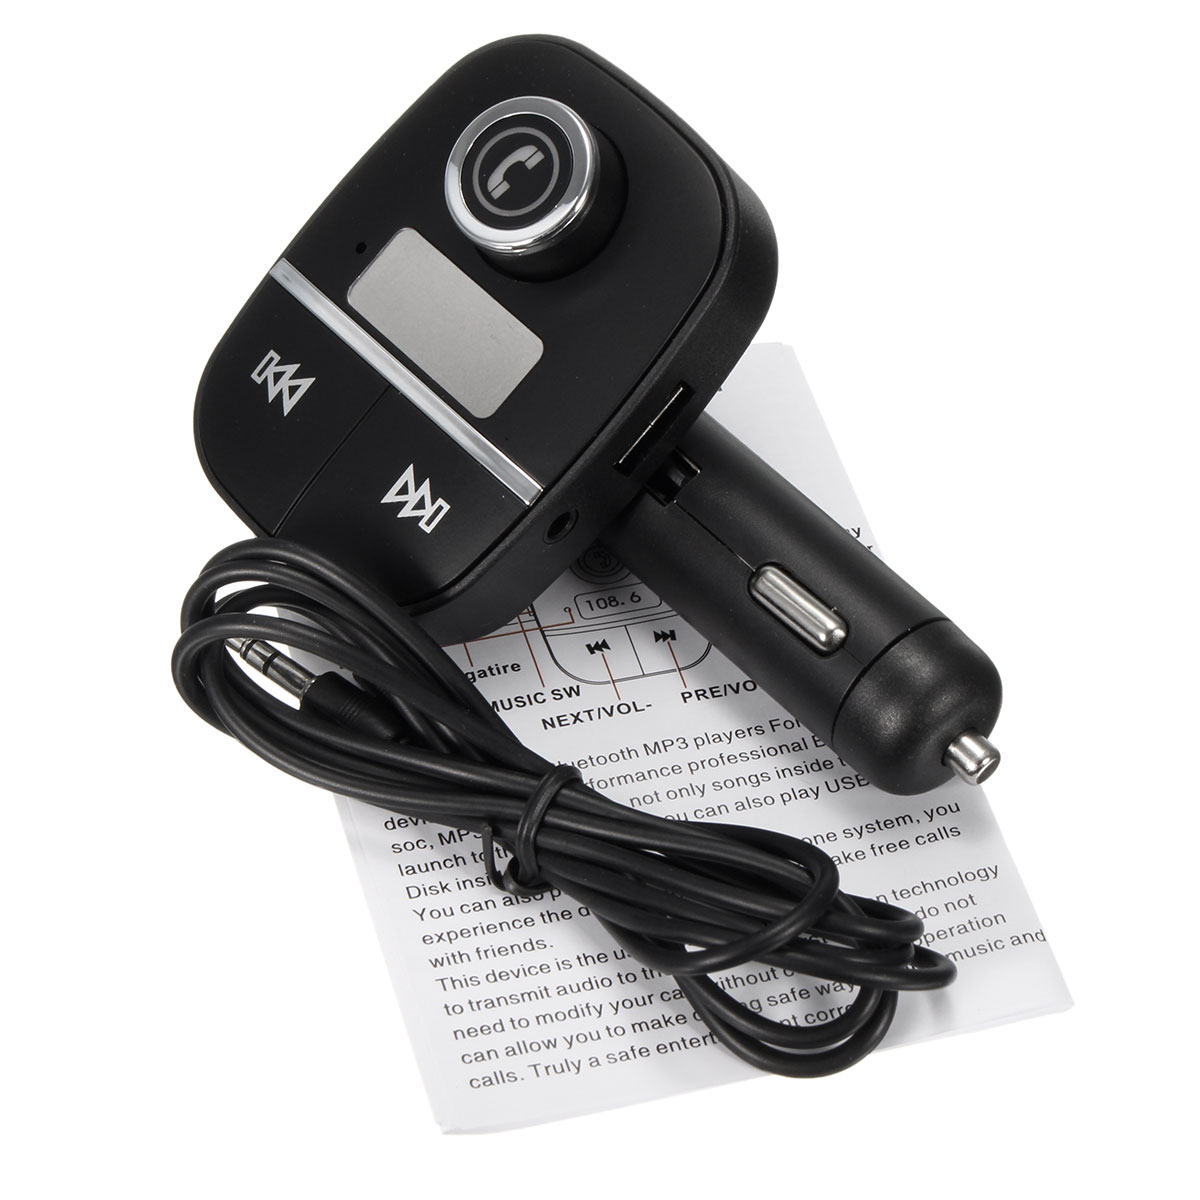 bluetooth-Hands-Free-Kit-Car-FM-Transimittervs-USB-Charger-AUX-MP3-Player-For-phones-1048806